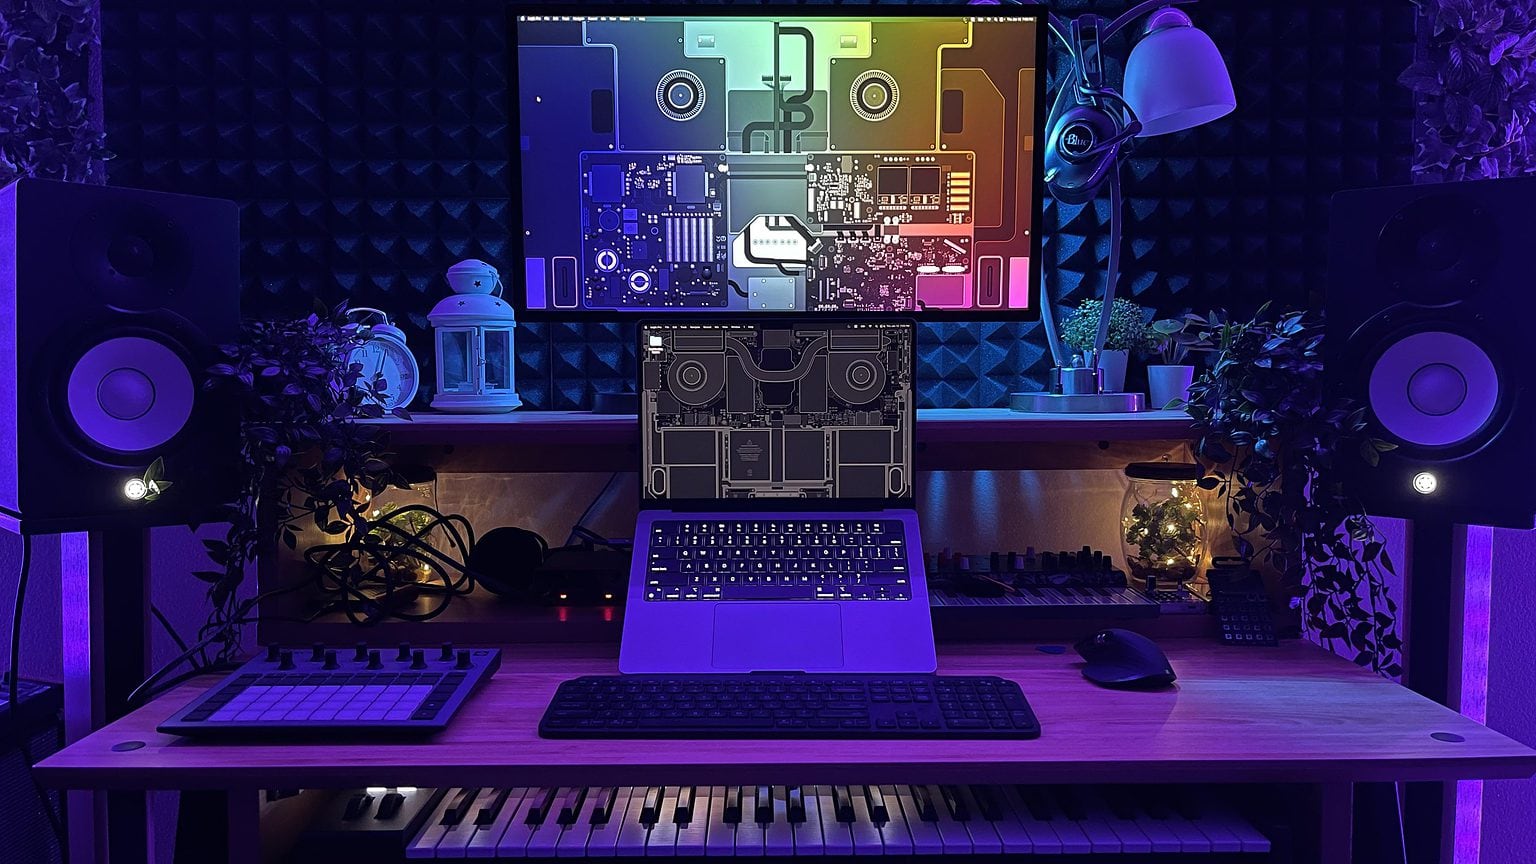 The desktop wallpaper by Basic Apple Guy really does a lot for this setup's visual effect.